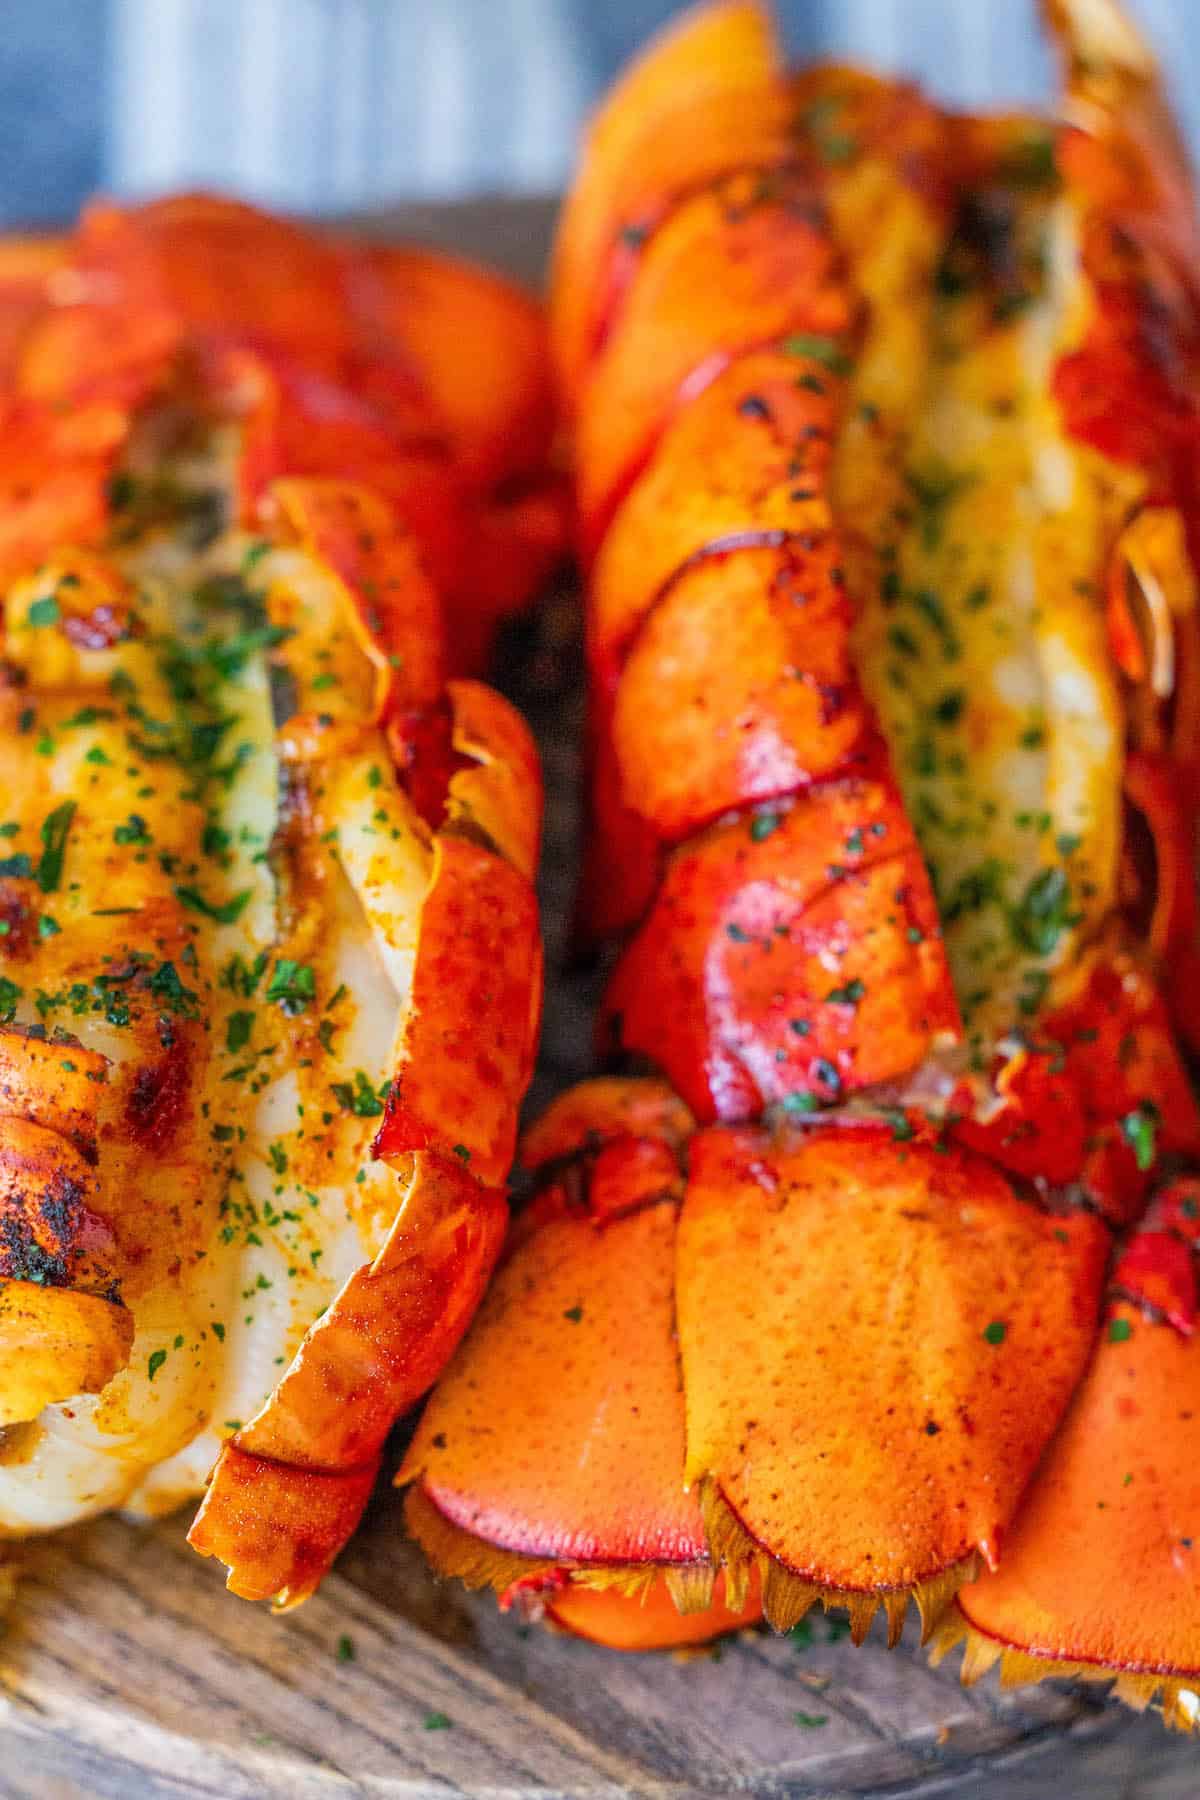 The Best Easy Broiled Lobster Tails Ever, featuring two succulent lobster tails beautifully presented on a wooden cutting board.